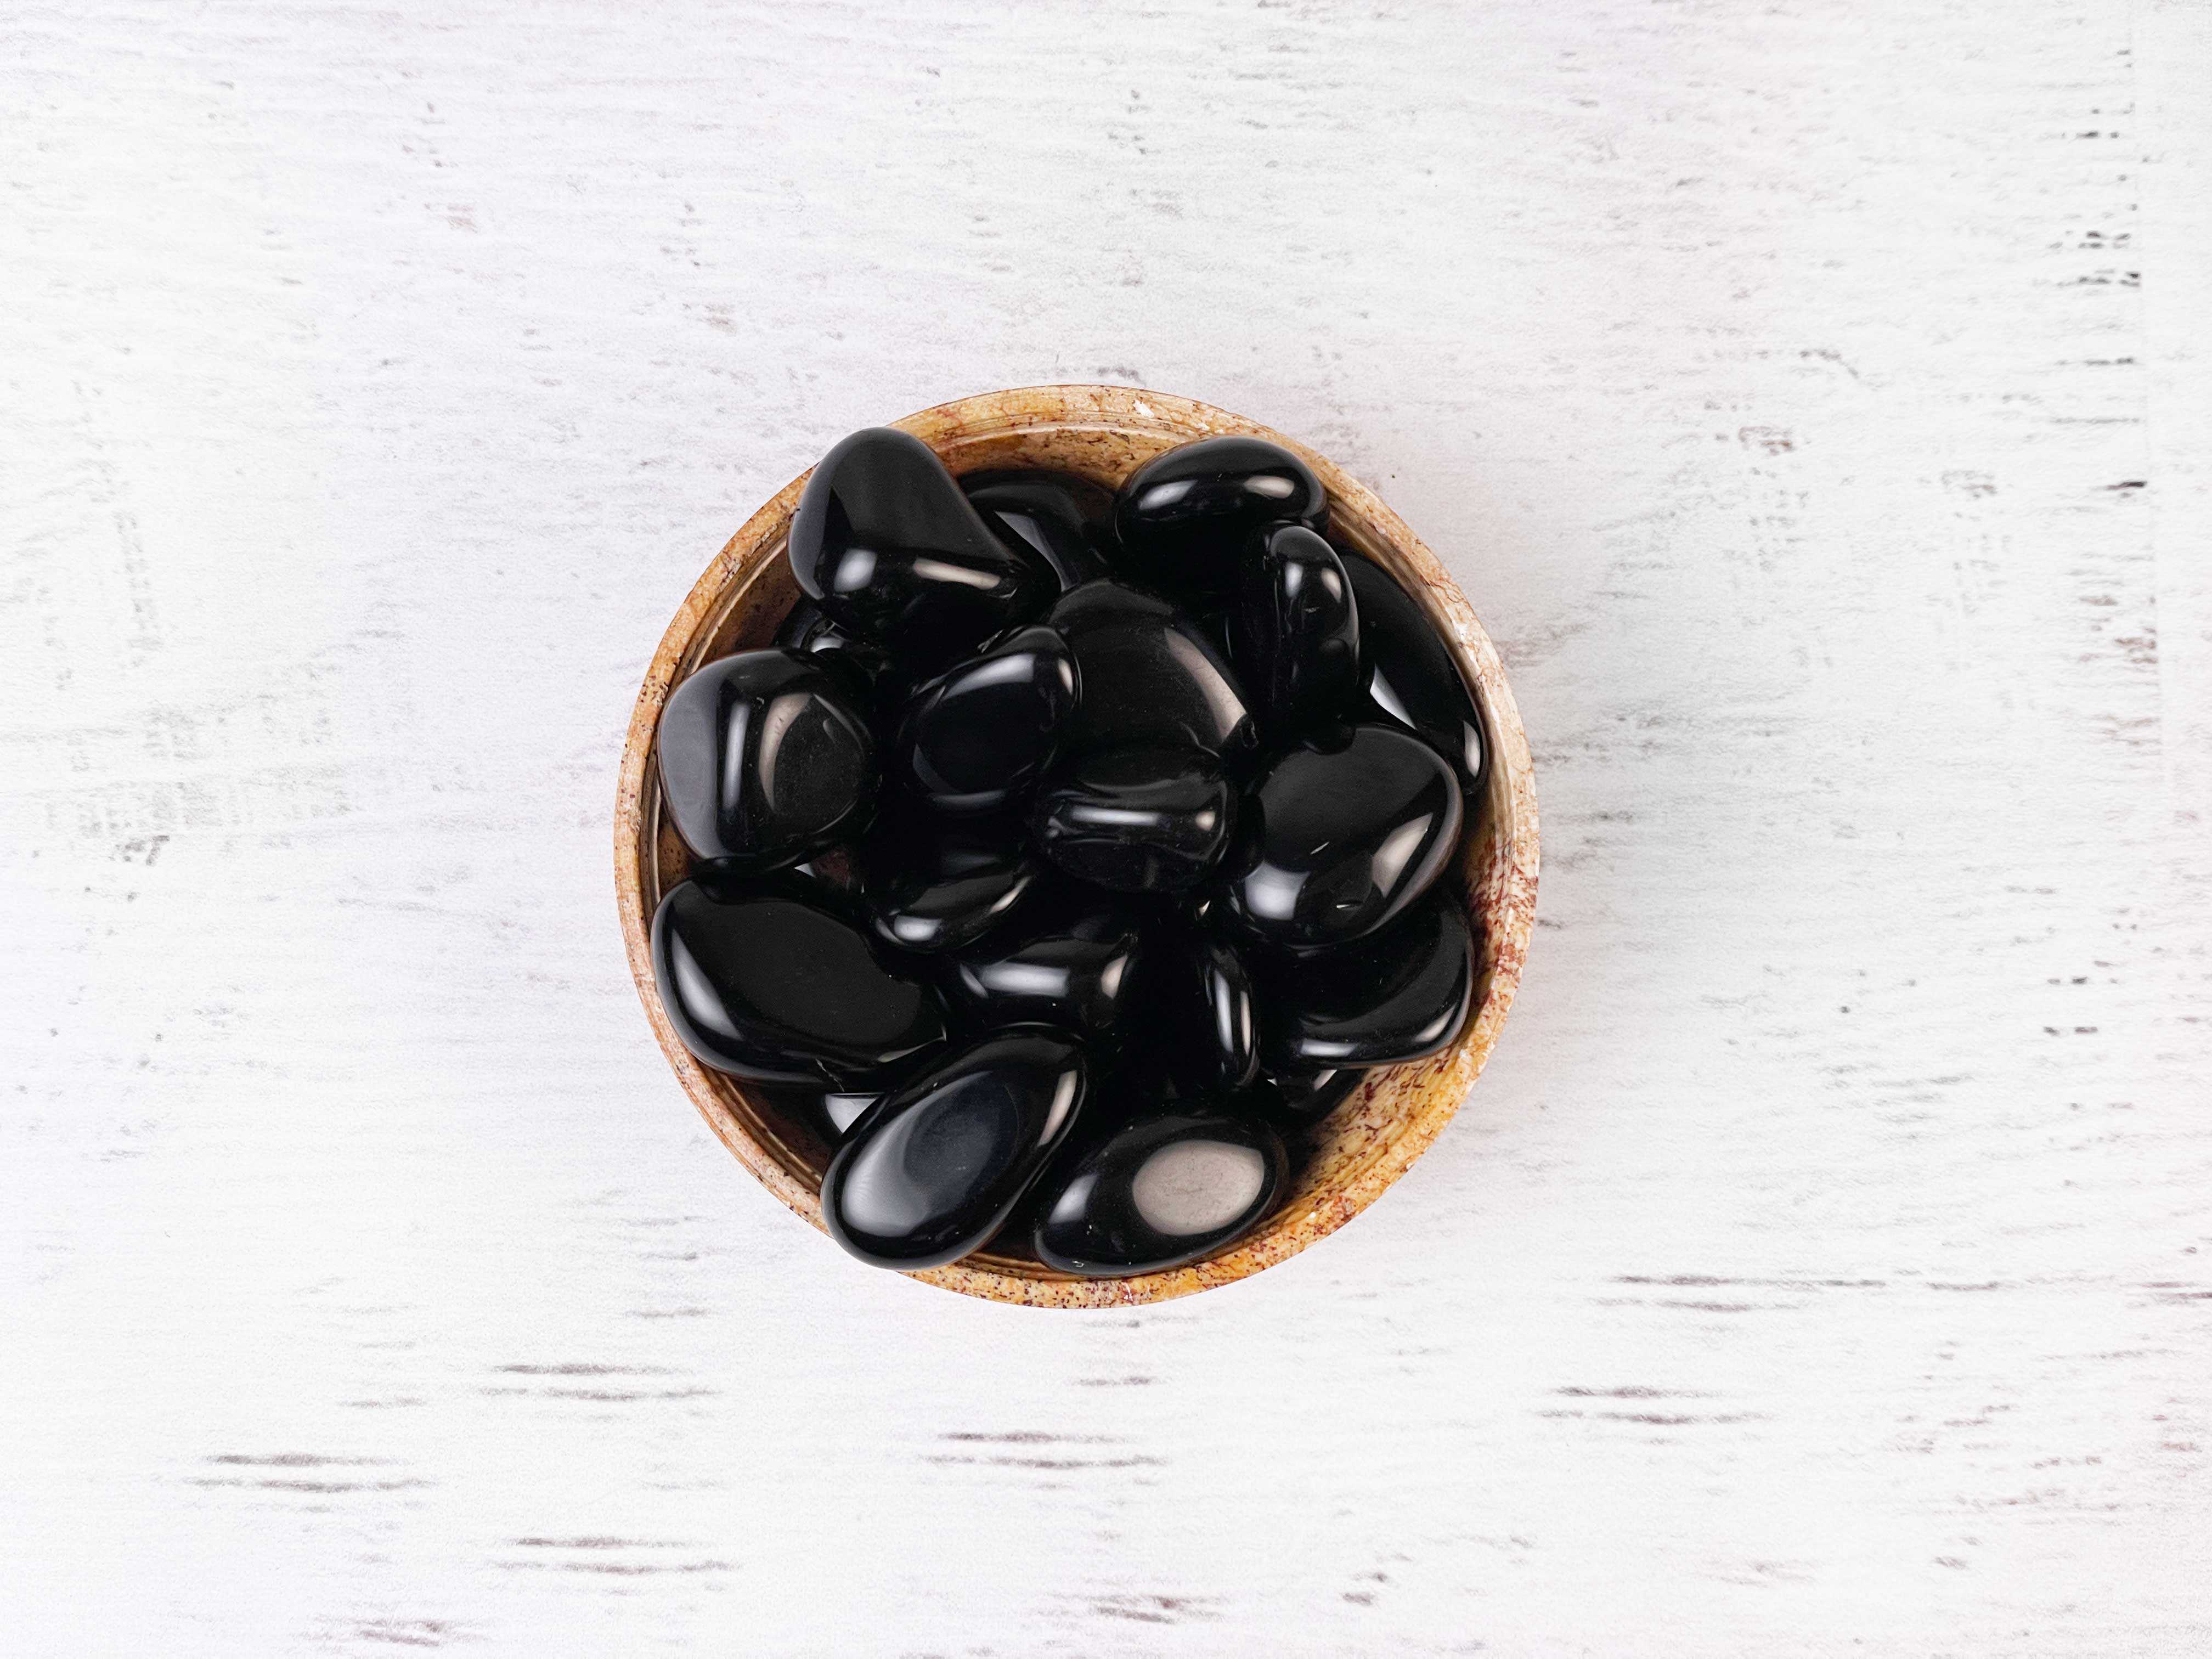 Buy Online Latest and Unique Tumbled Black Obsidian - Psychic Protection, Grounding, Cleansing, Spirit Communication | Shop Best Spiritual Items - The Mystical Ritual